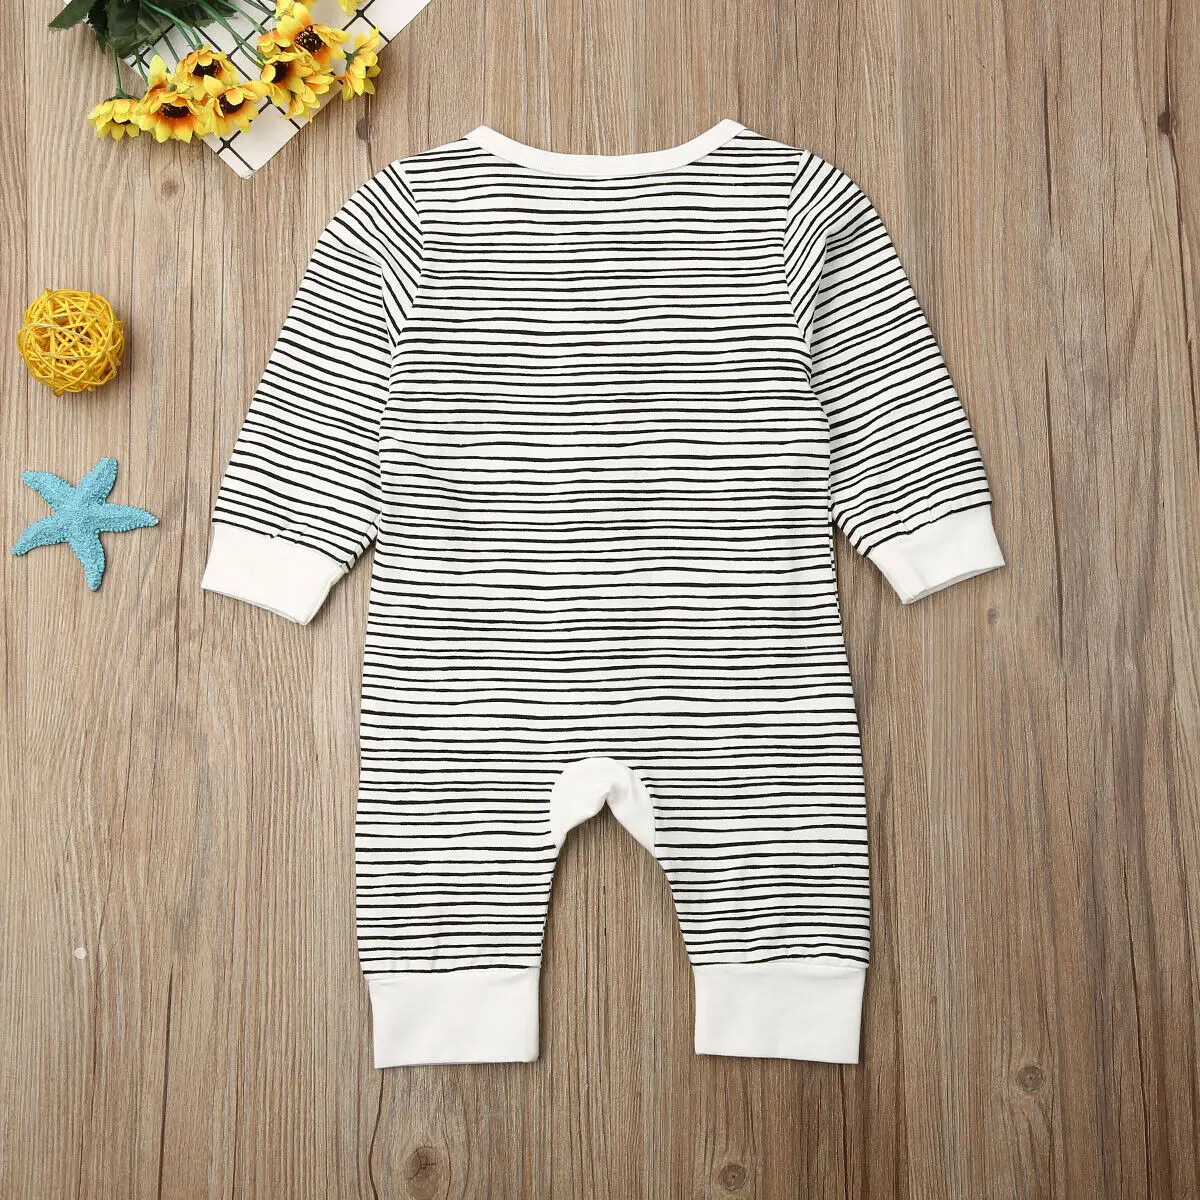 Newborn Baby Boy Girl Cotton Romper Long Sleeve Jumpsuit Playsuit Clothes Baby Boys Clothes New Born Clothing Infantil